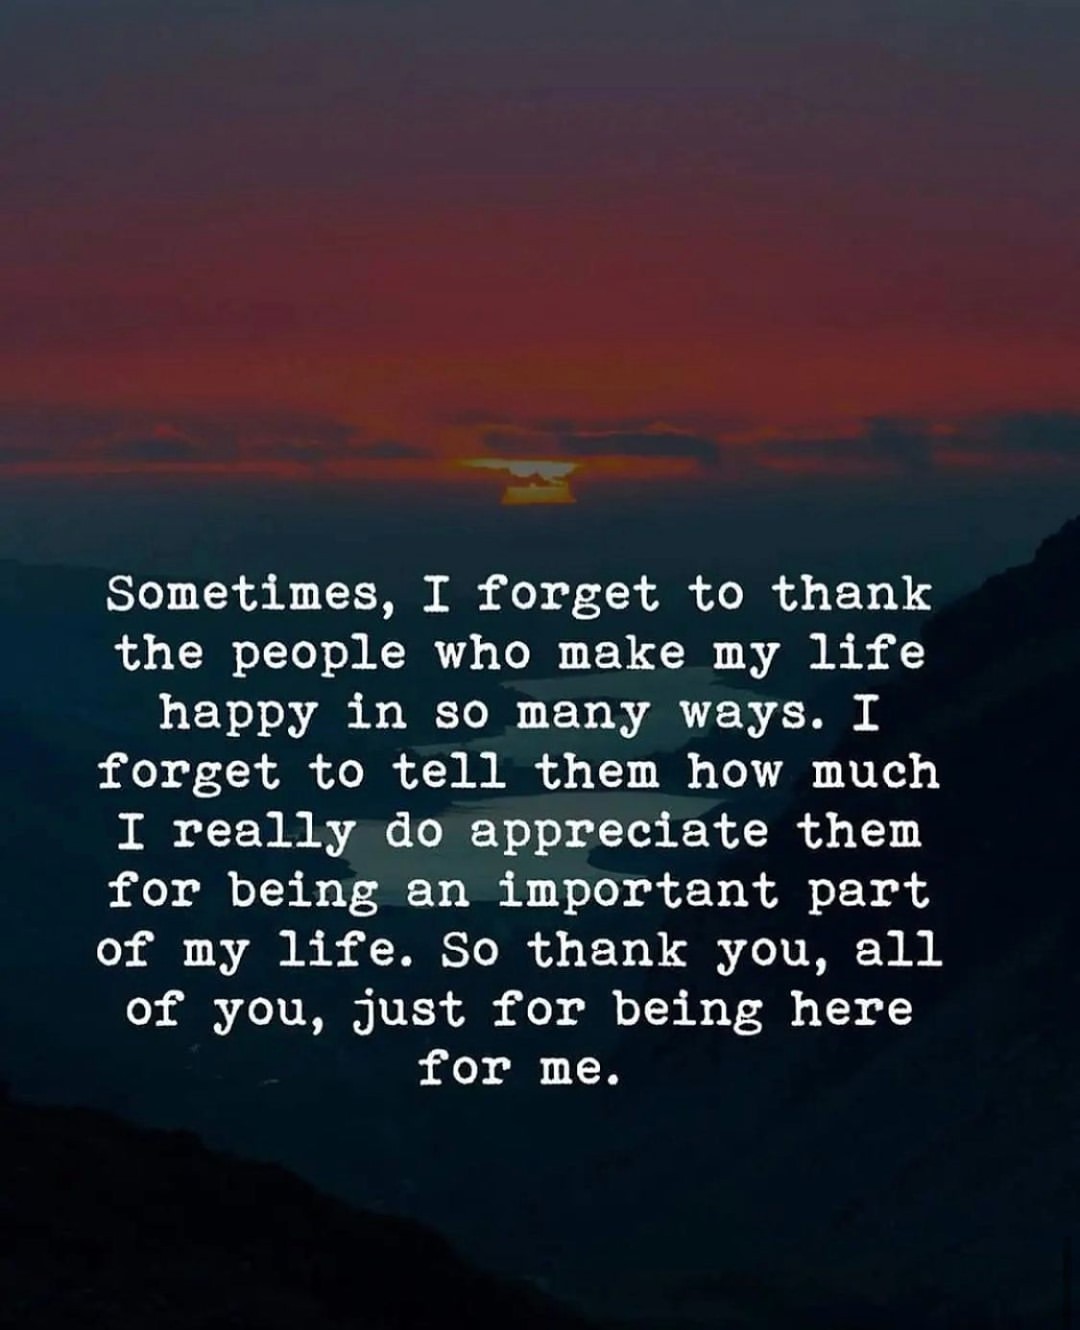 Sometimes, I forget to thank the people who make my life happy in so many ways. I forget to tell them how much I really do appreciate them for being an important part of my life. So thank you, all of you, just for being here for me.